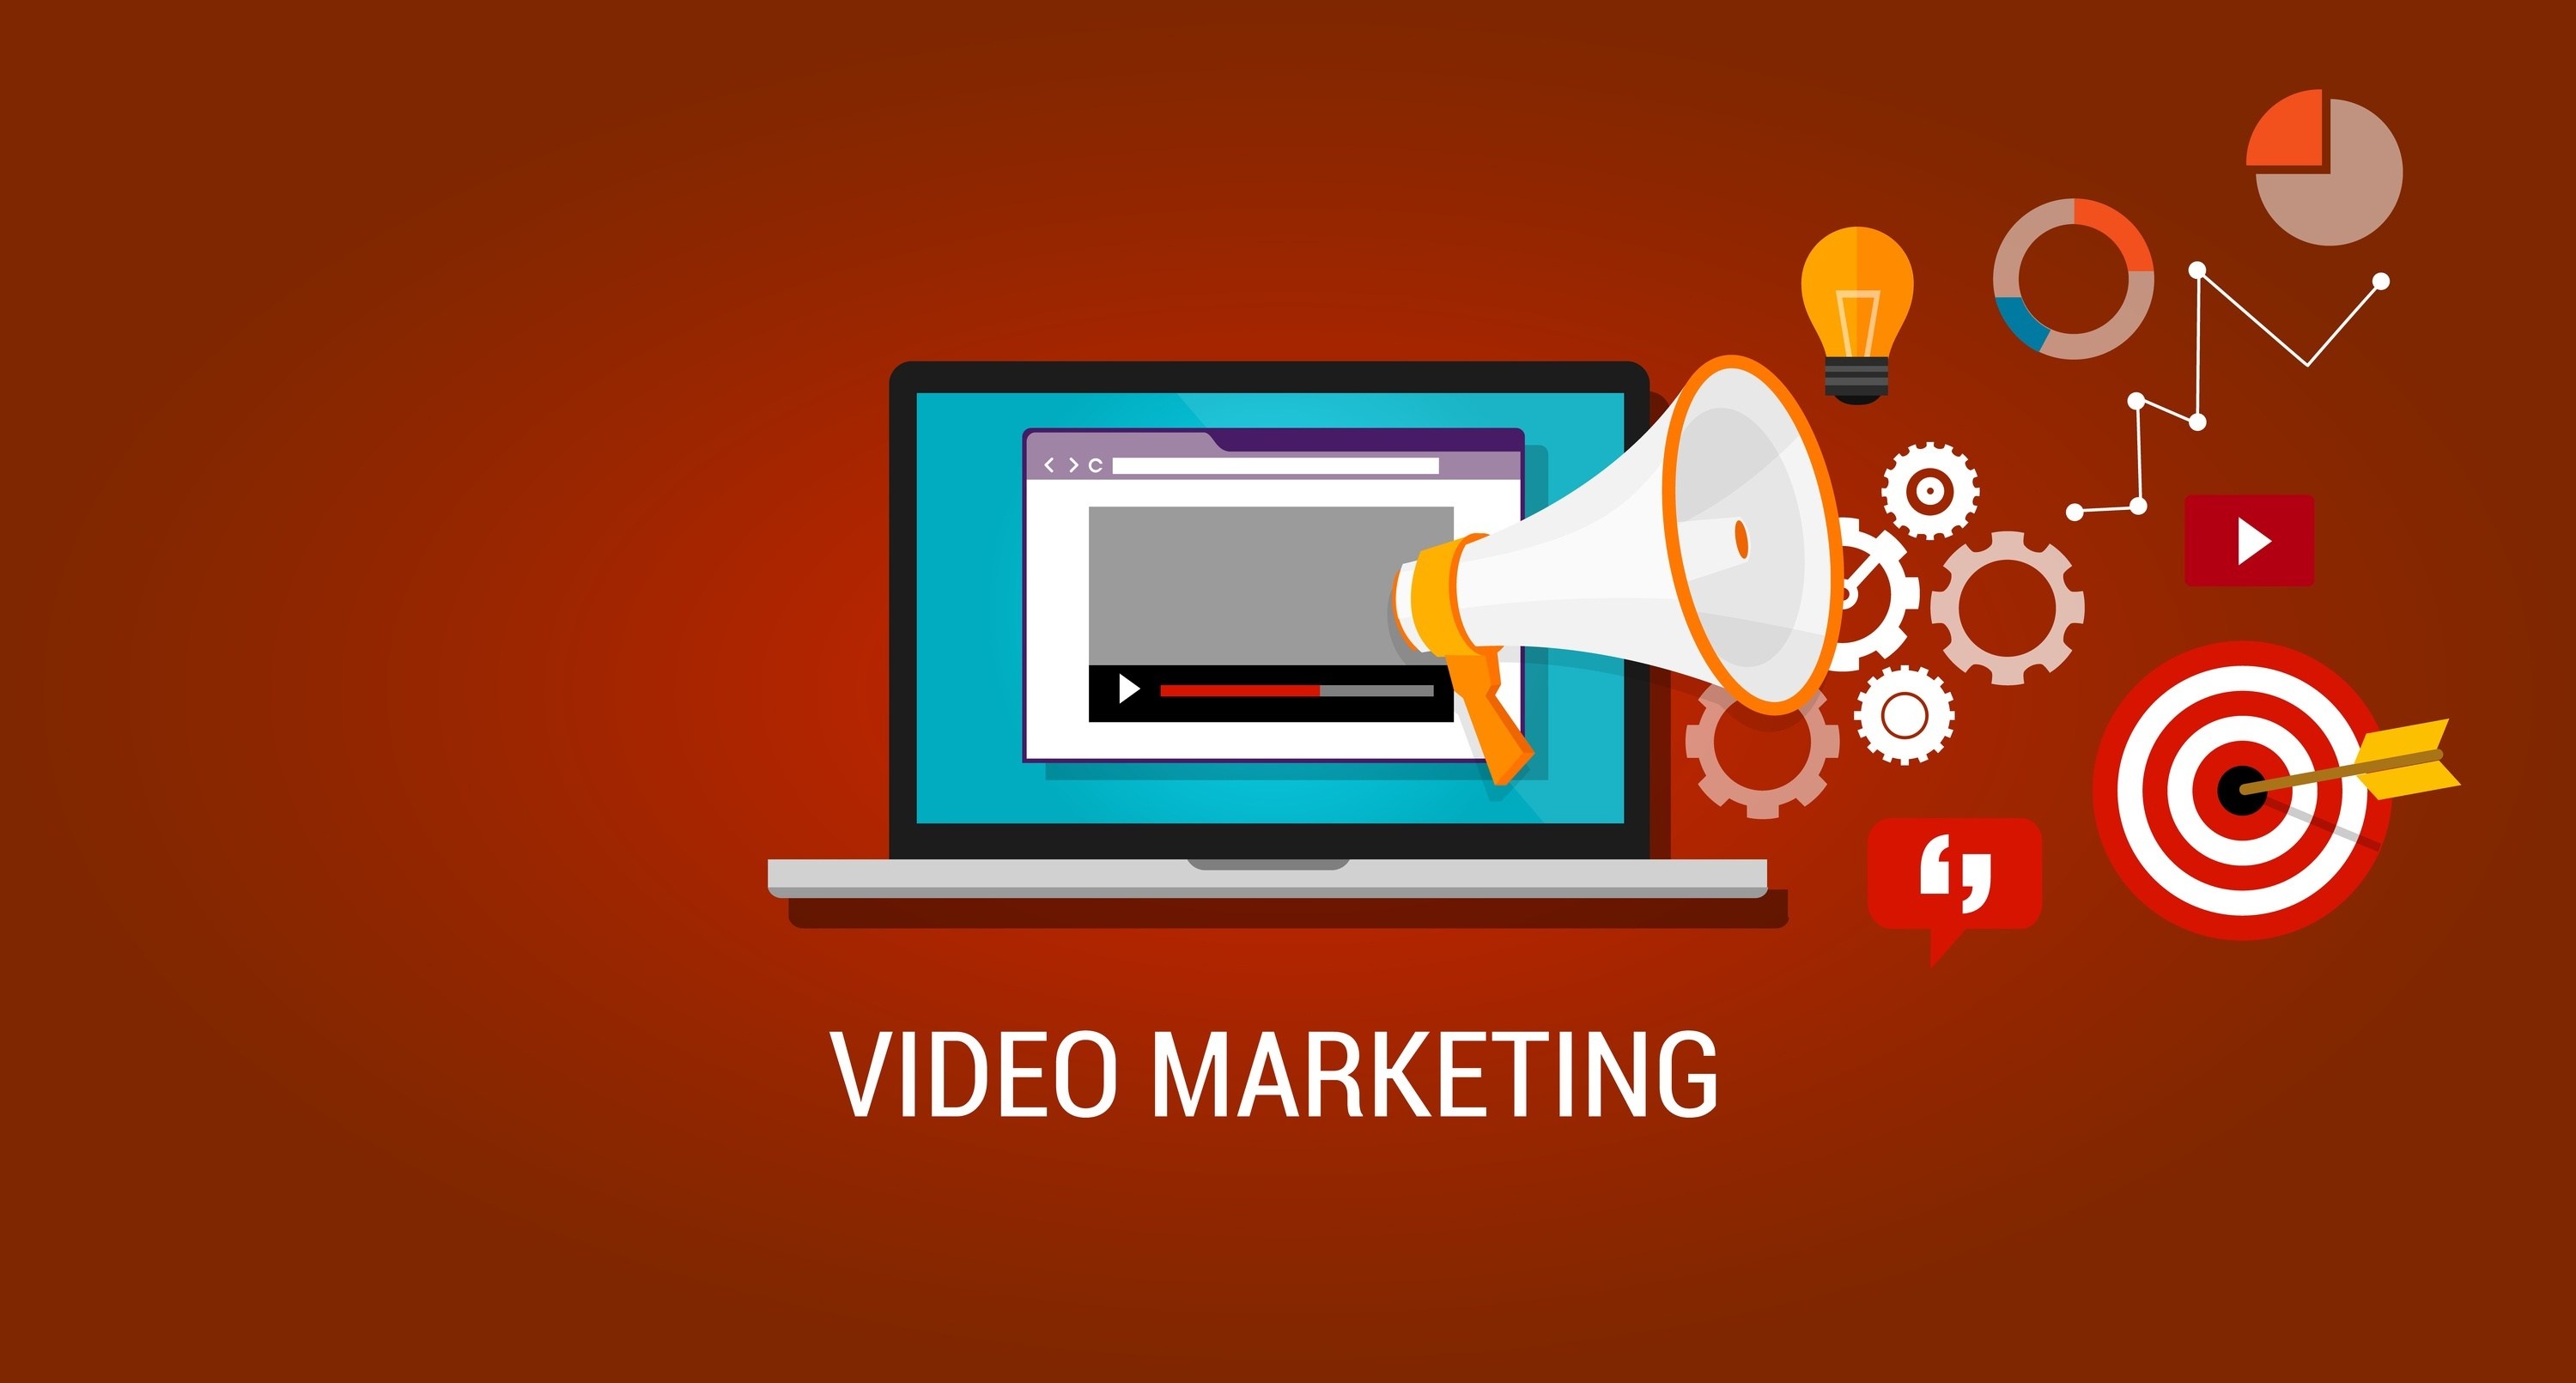 How to Use Influencer Video Marketing to Grow Your Brand